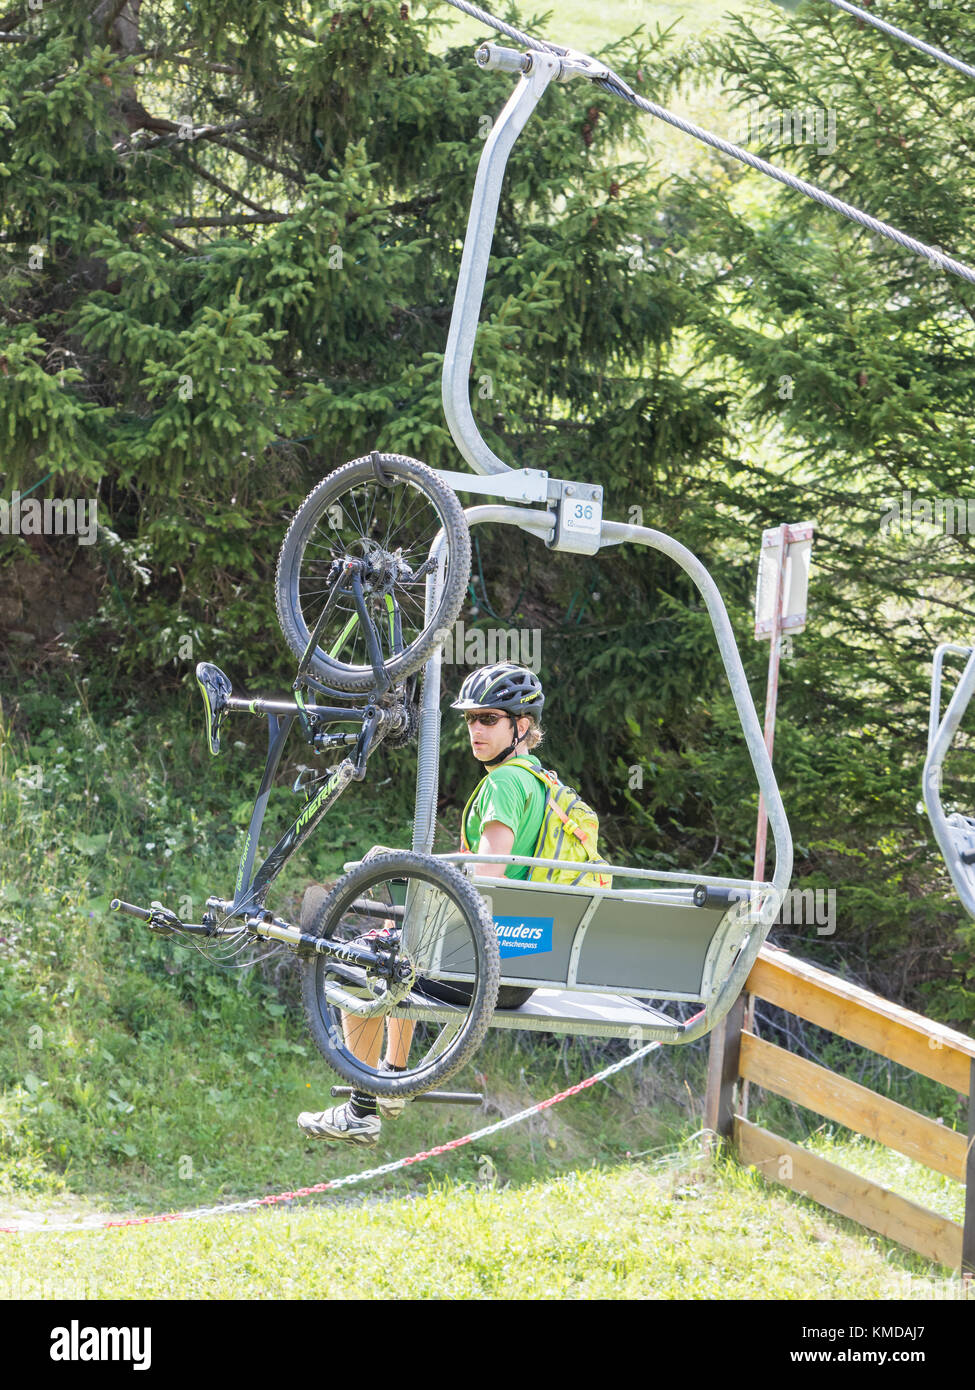 Nauders, Austria - August 4, 2017: Man with a mountainbike sitting in one of the many ski lifts in the Nauders area, summer sports. Stock Photo